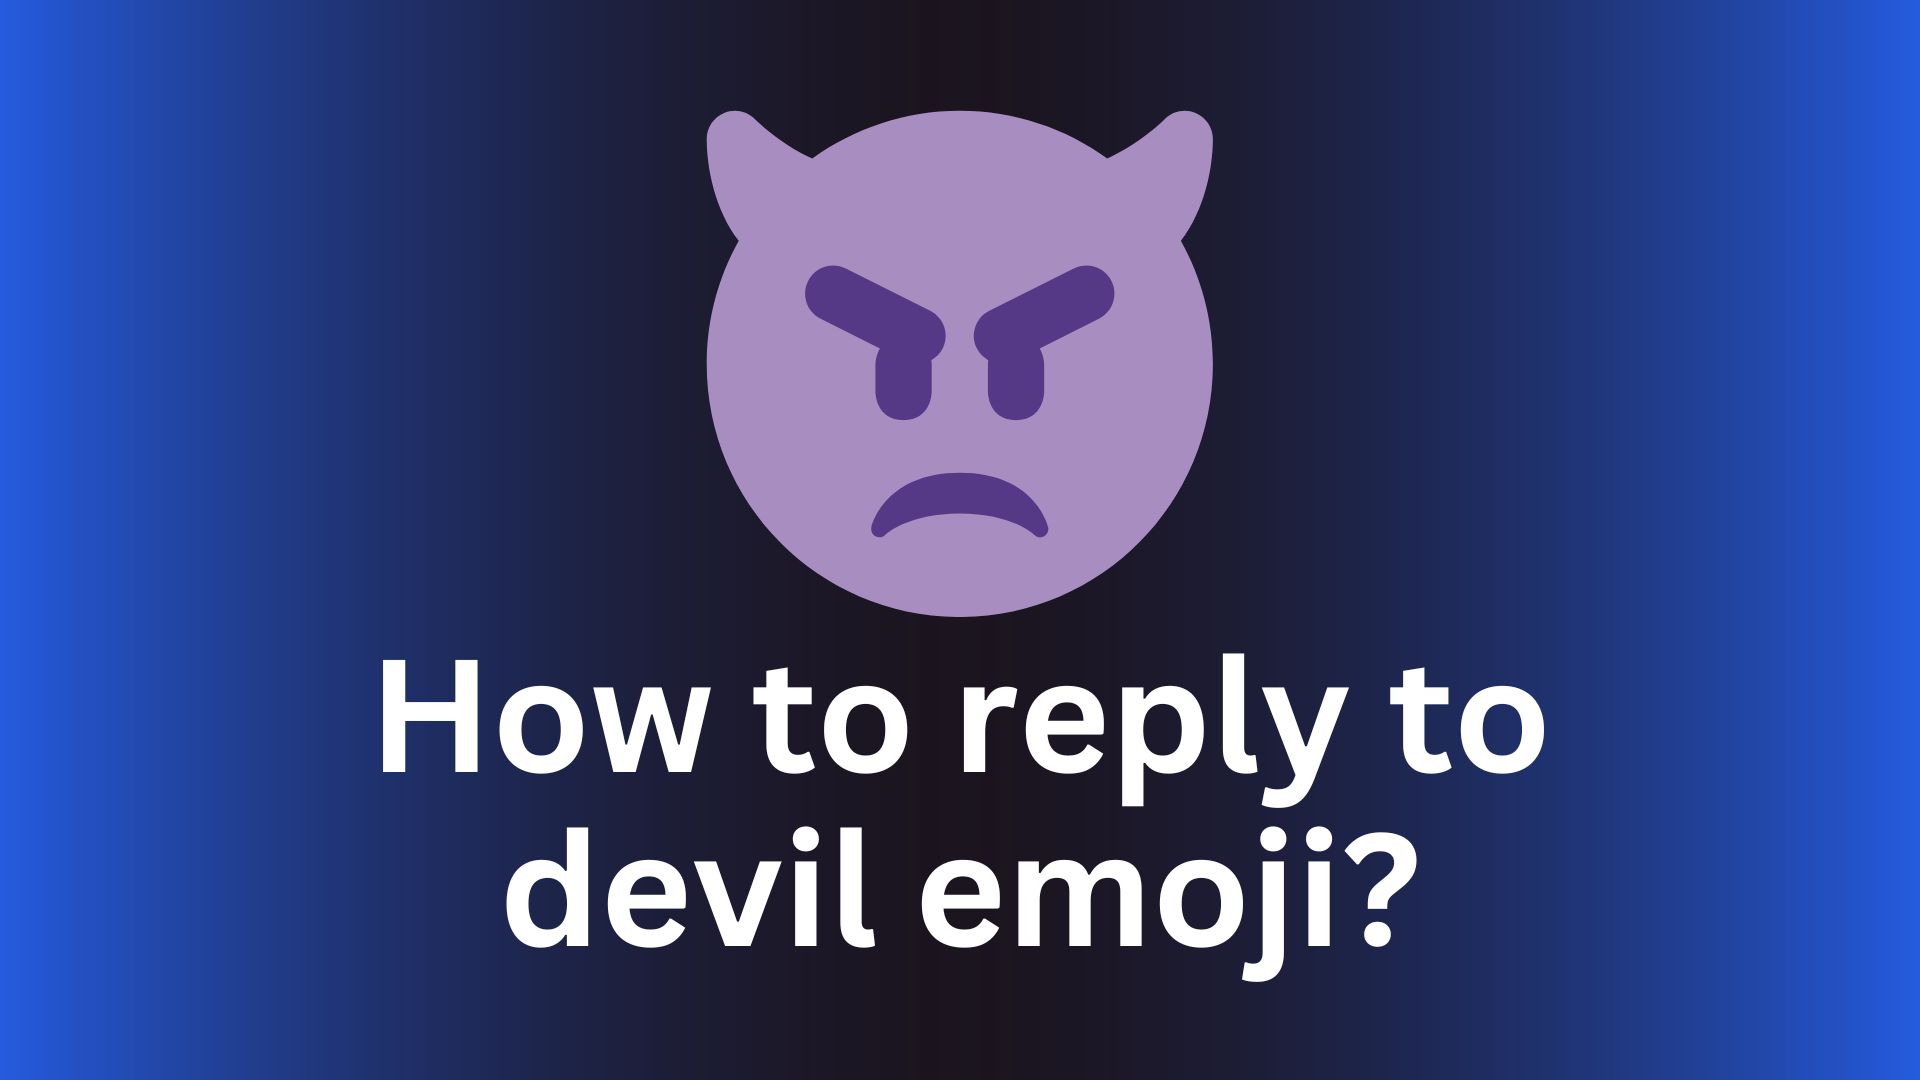 How to reply to devil emoji